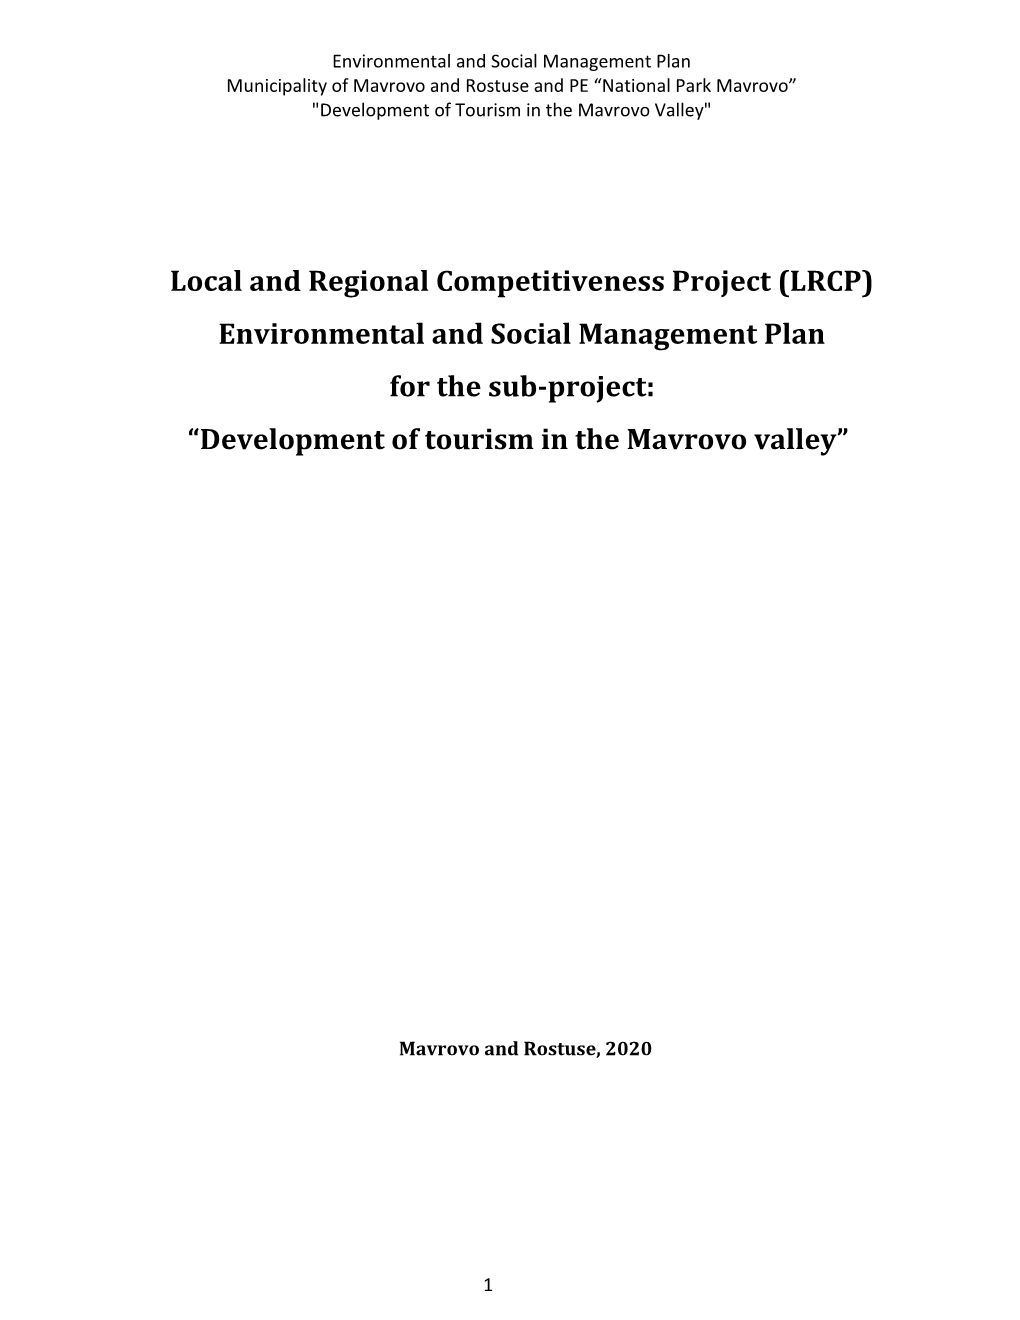 Environmental and Social Management Plan for the Sub-Project: “Development of Tourism in the Mavrovo Valley”